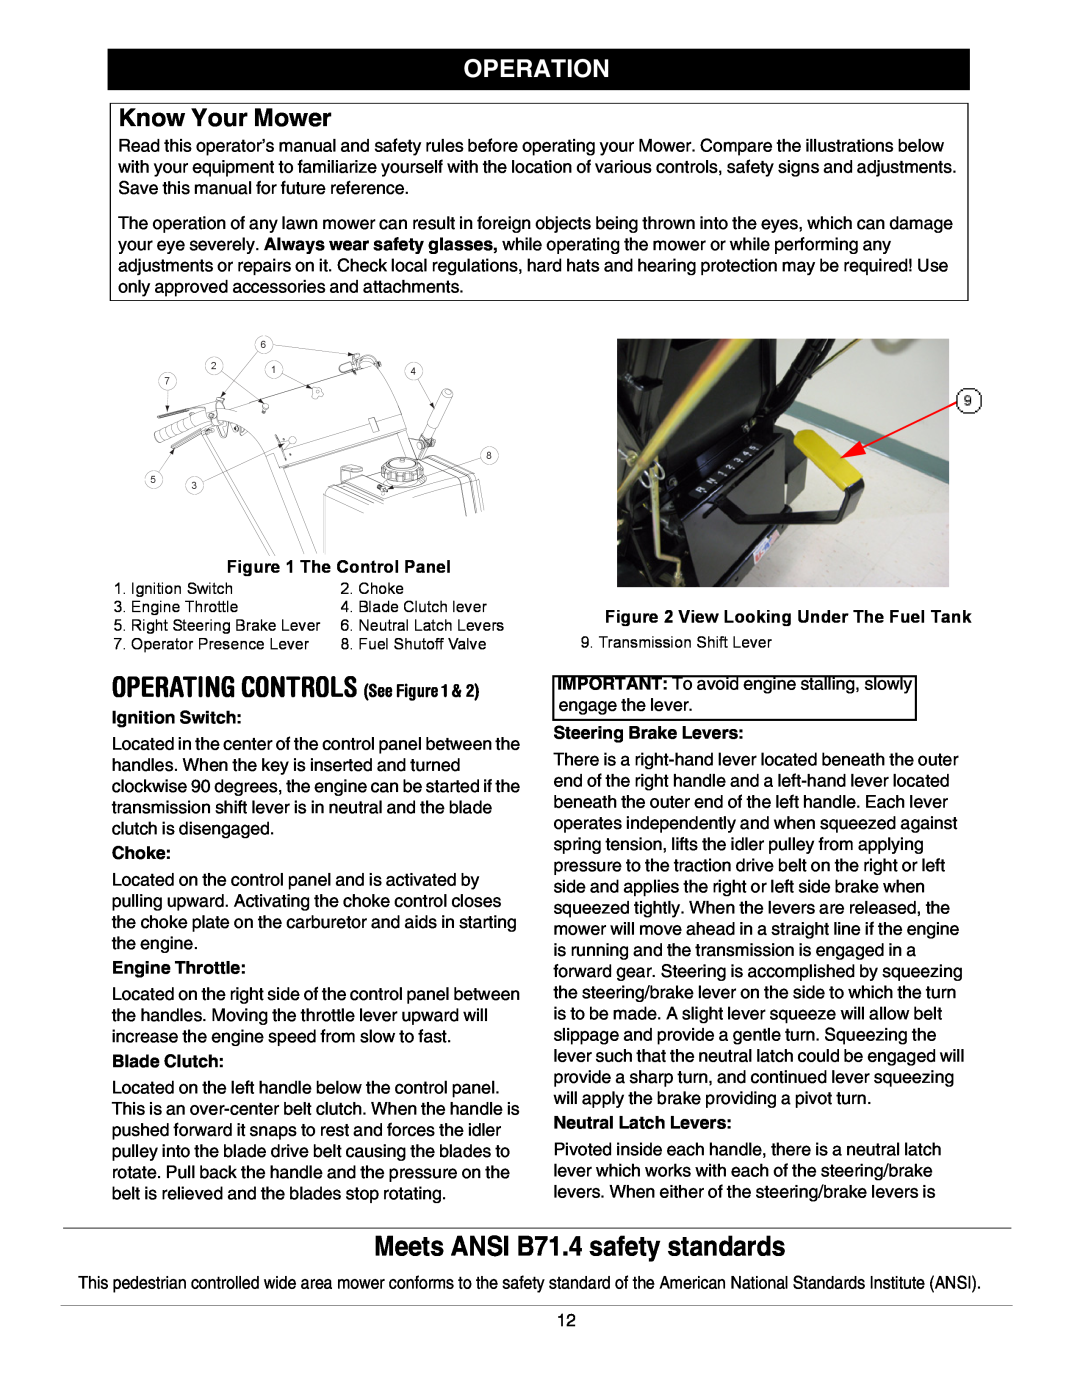 Cub Cadet G 1236 Operation, Know Your Mower, OPERATING CONTROLS See Figure, Meets ANSI B71.4 safety standards, Choke 